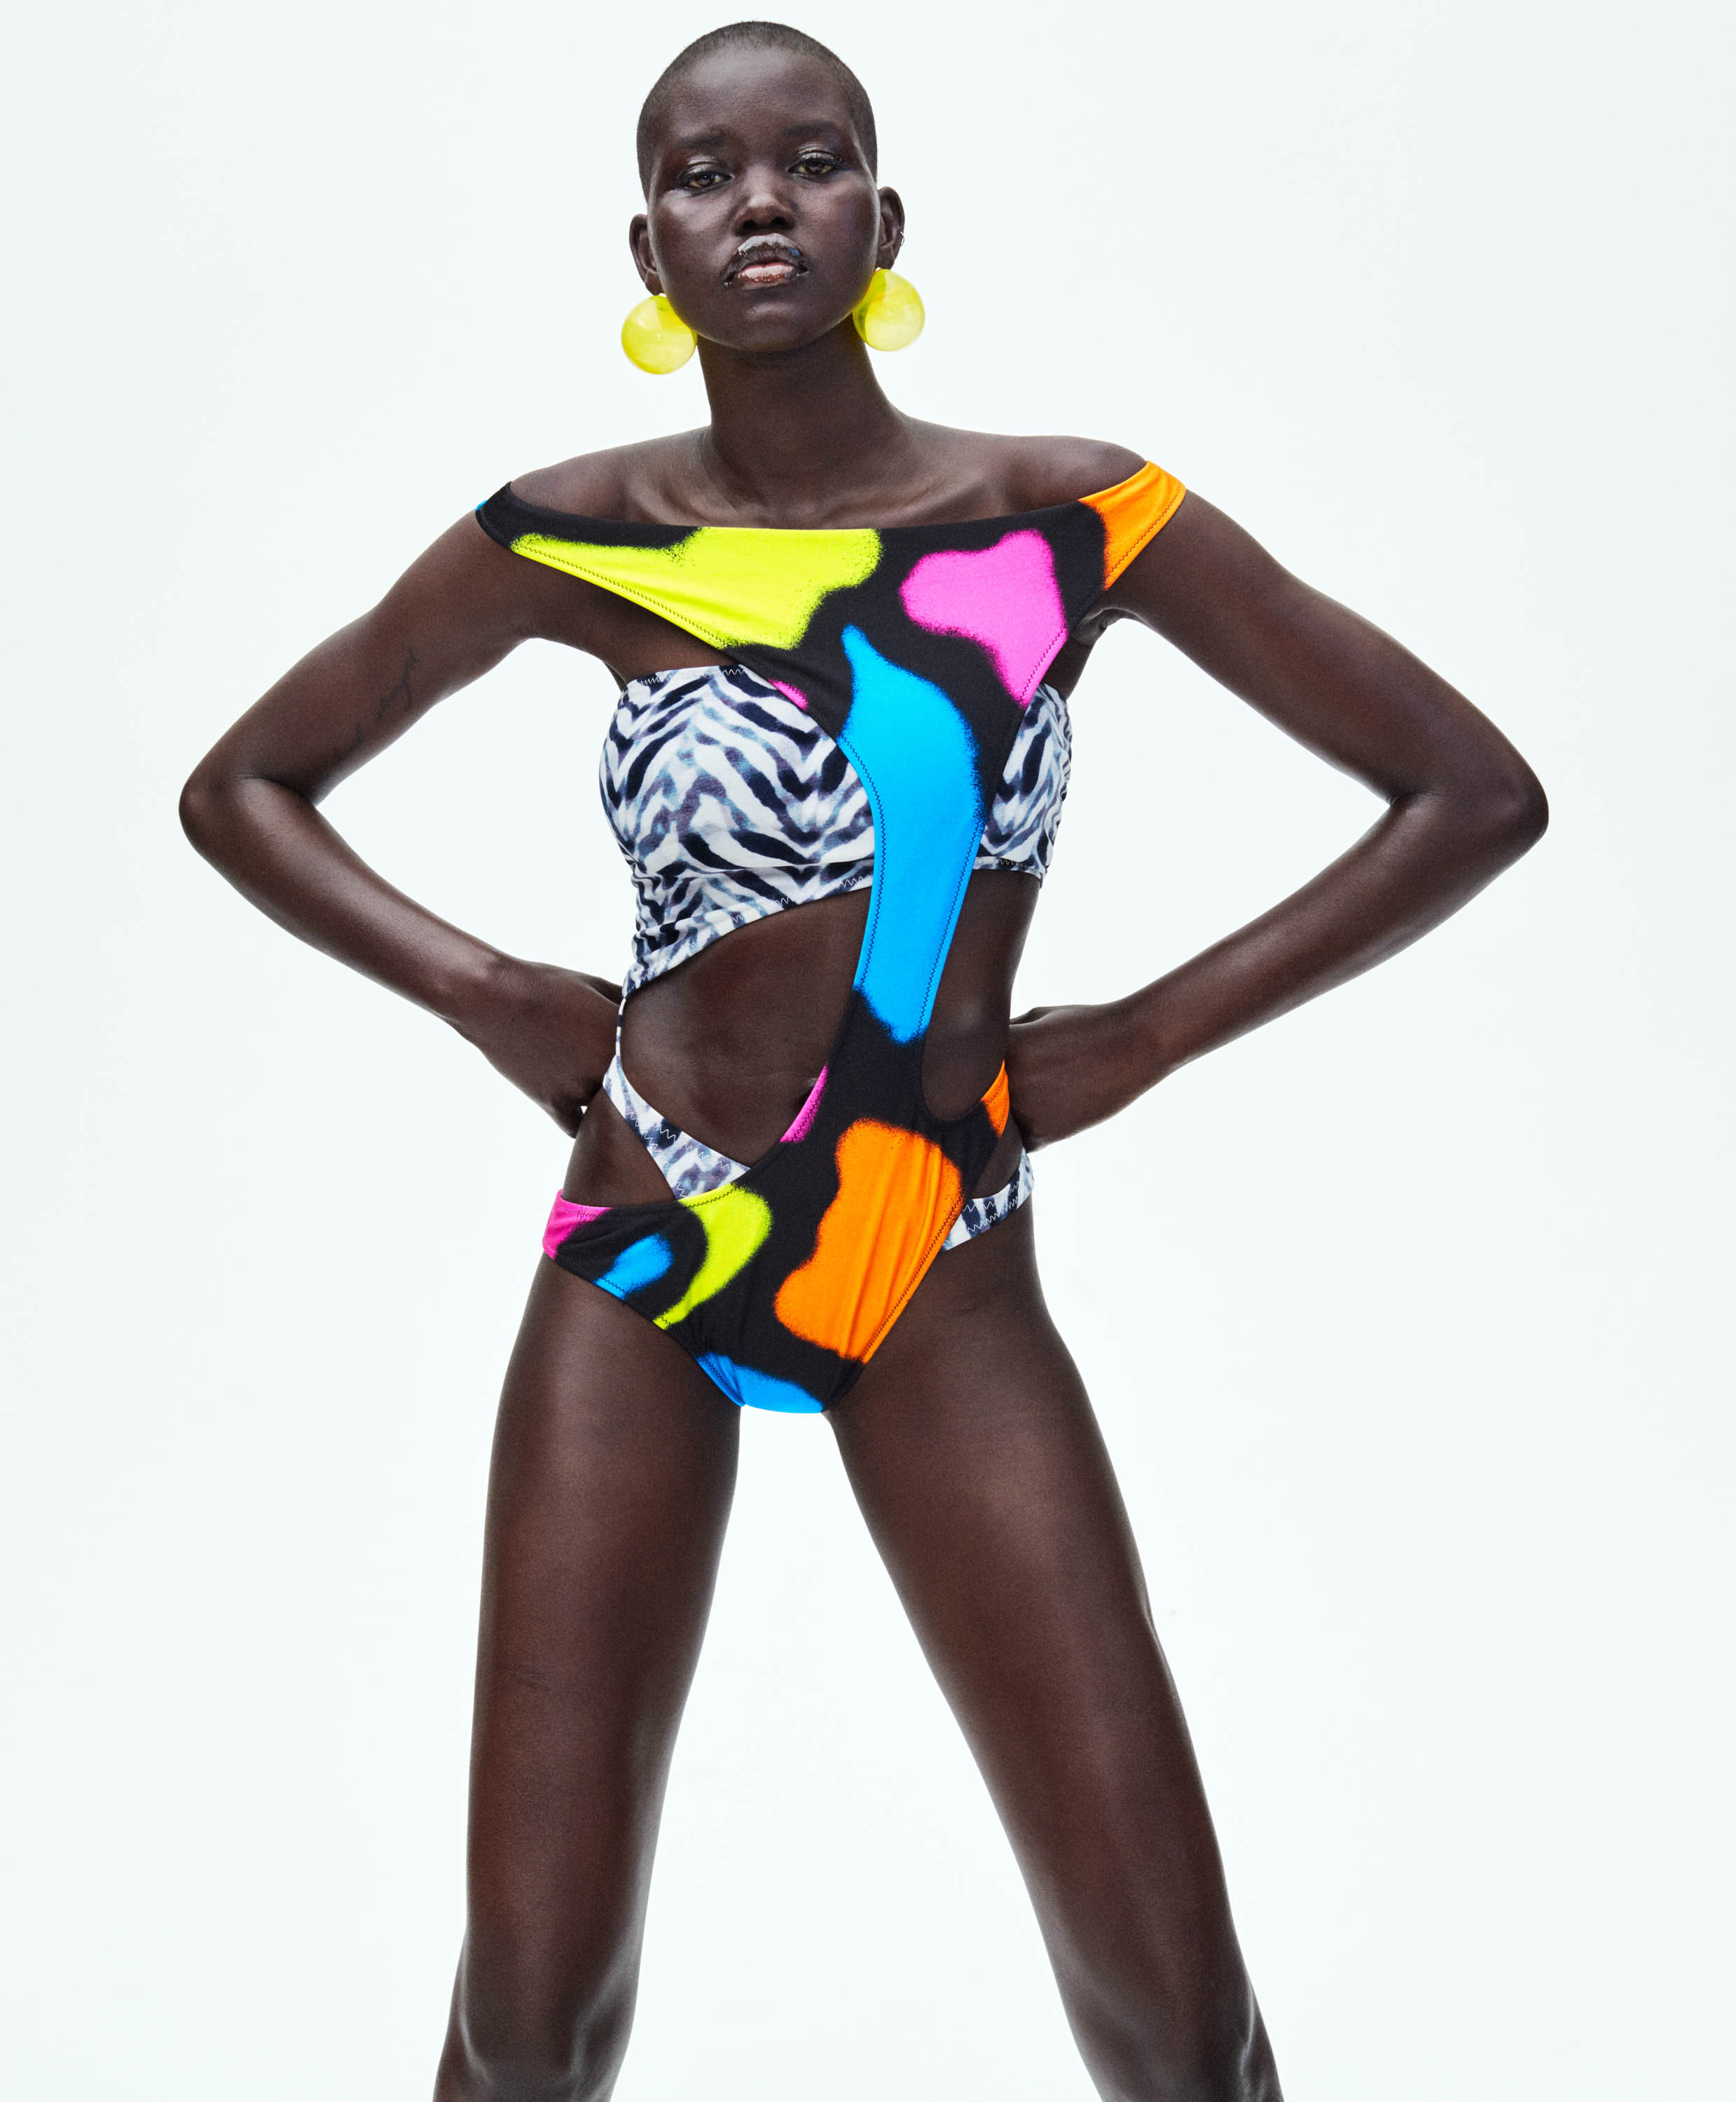 Photos n°1 : Adut Akech and her Mile Long Legs